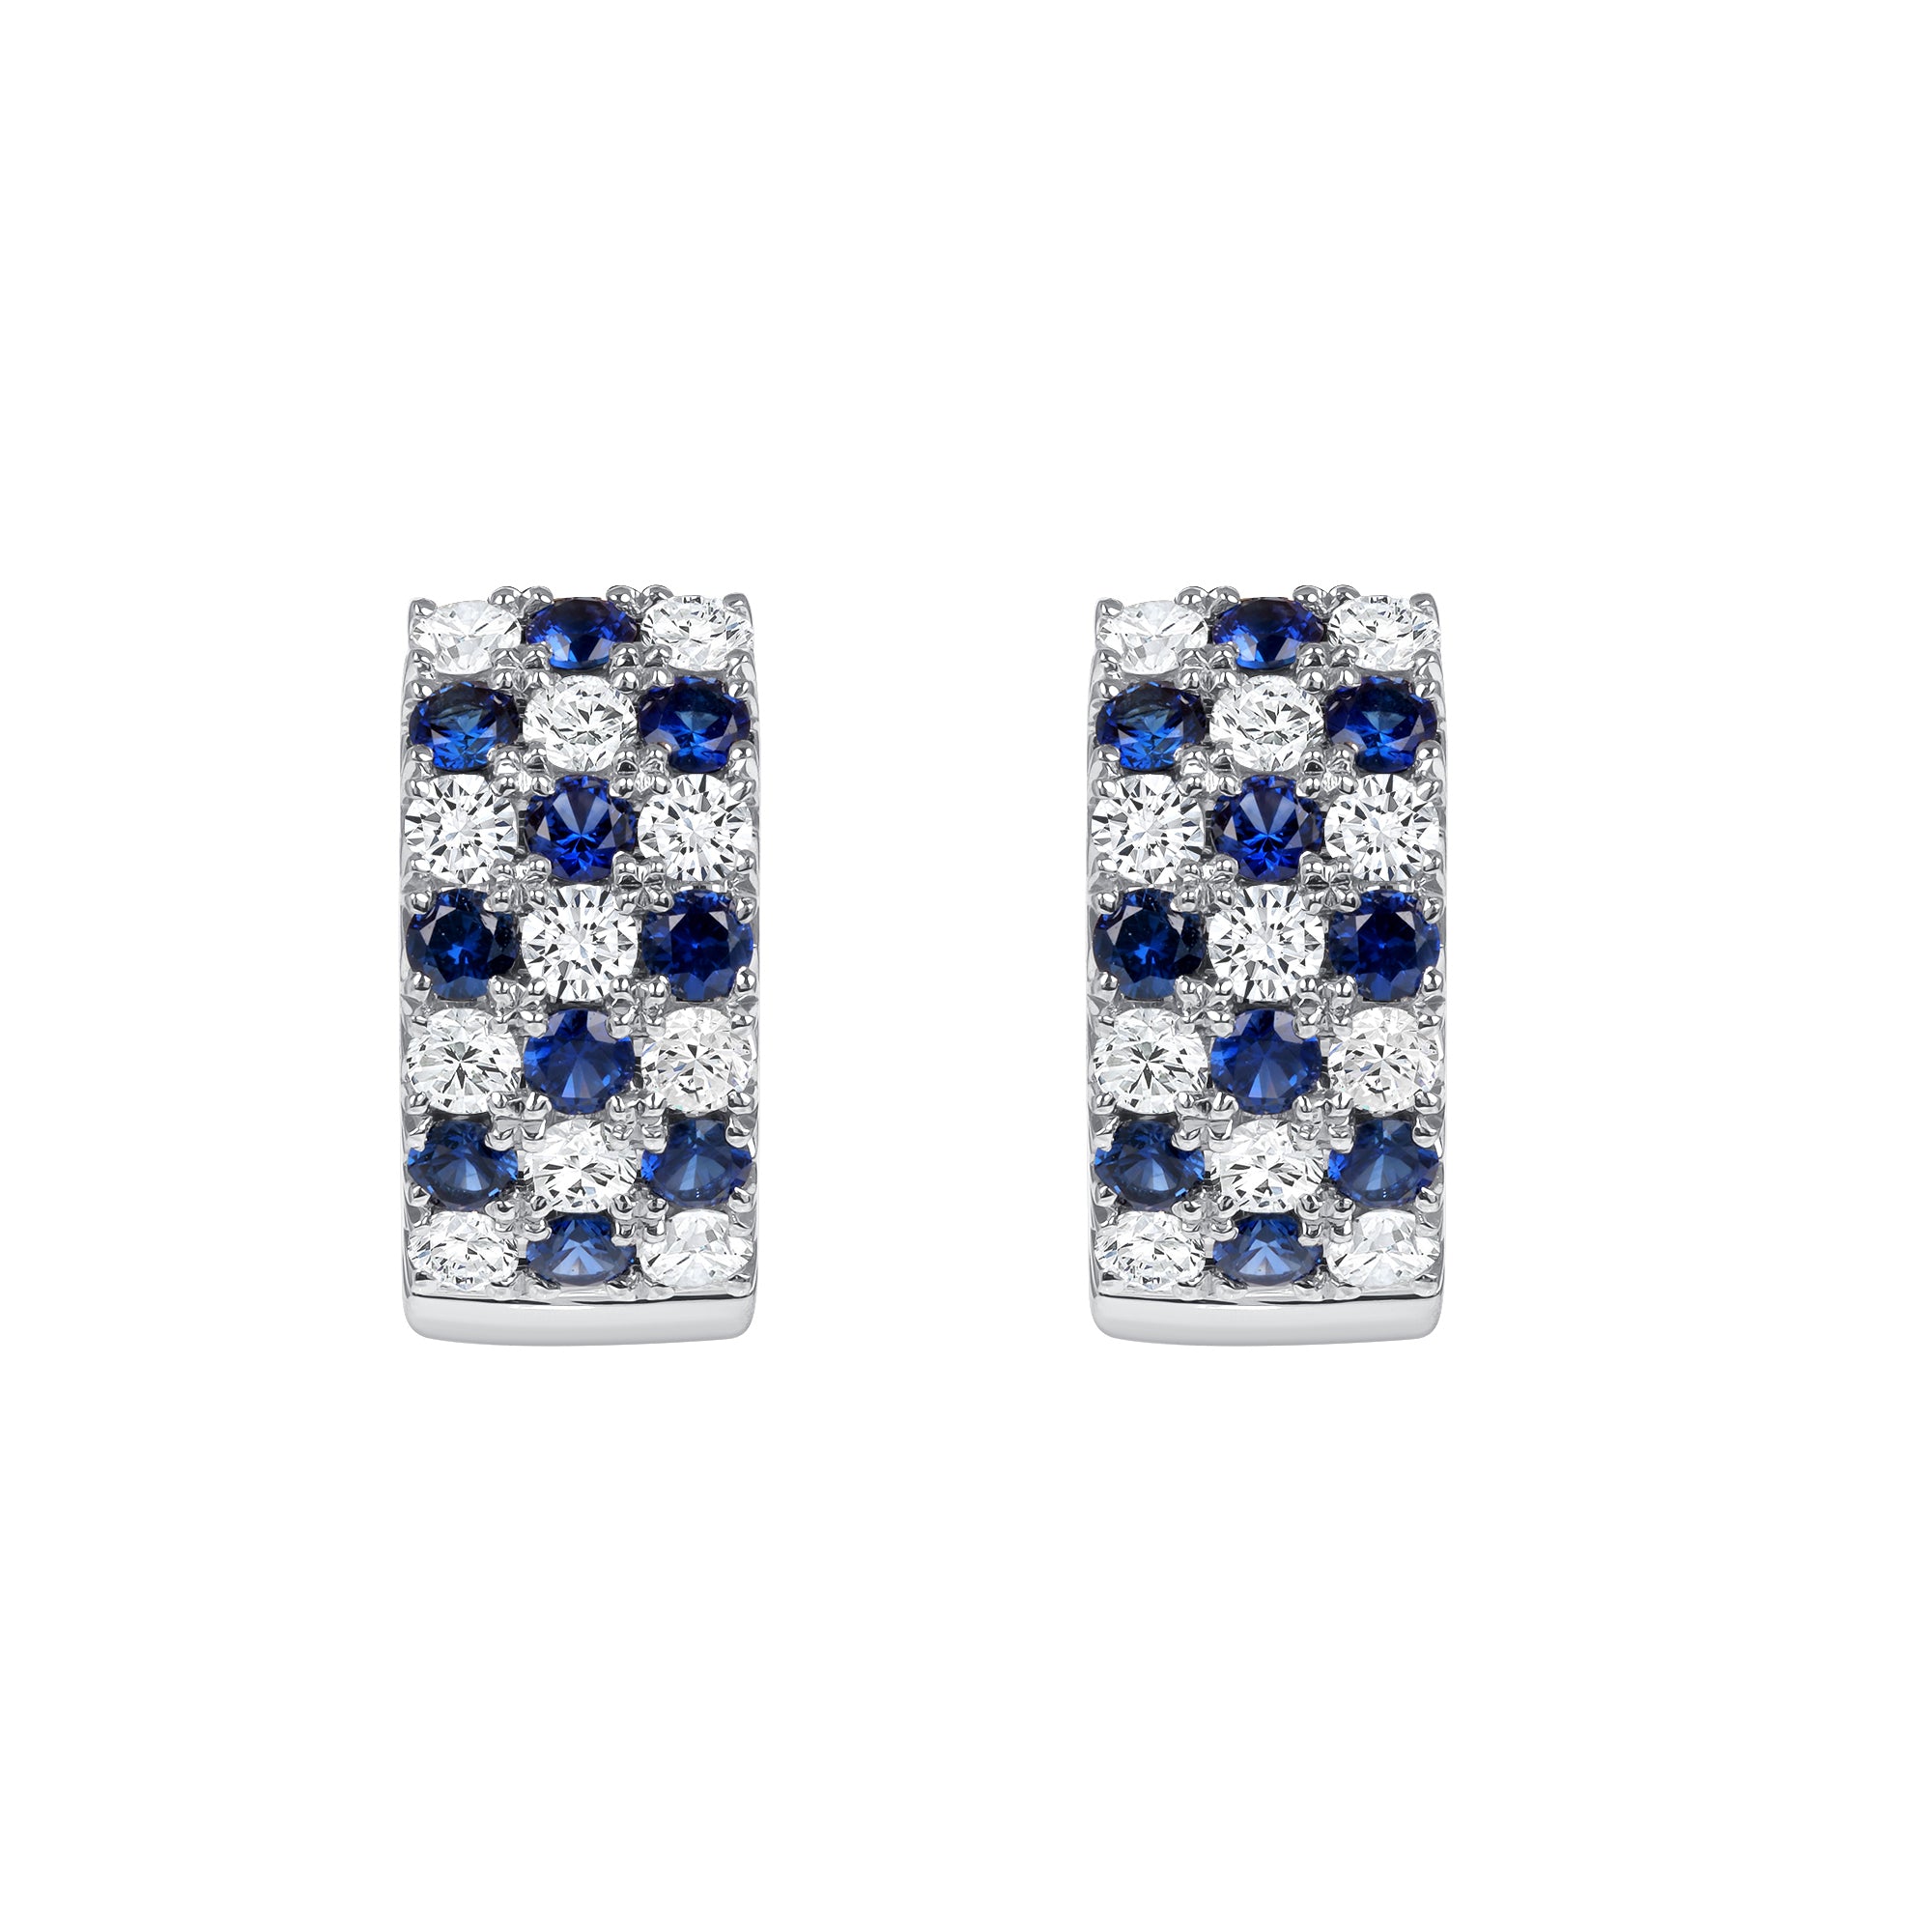 Checkered Sapphire and Diamond Huggie Earrings in 18K White Gold